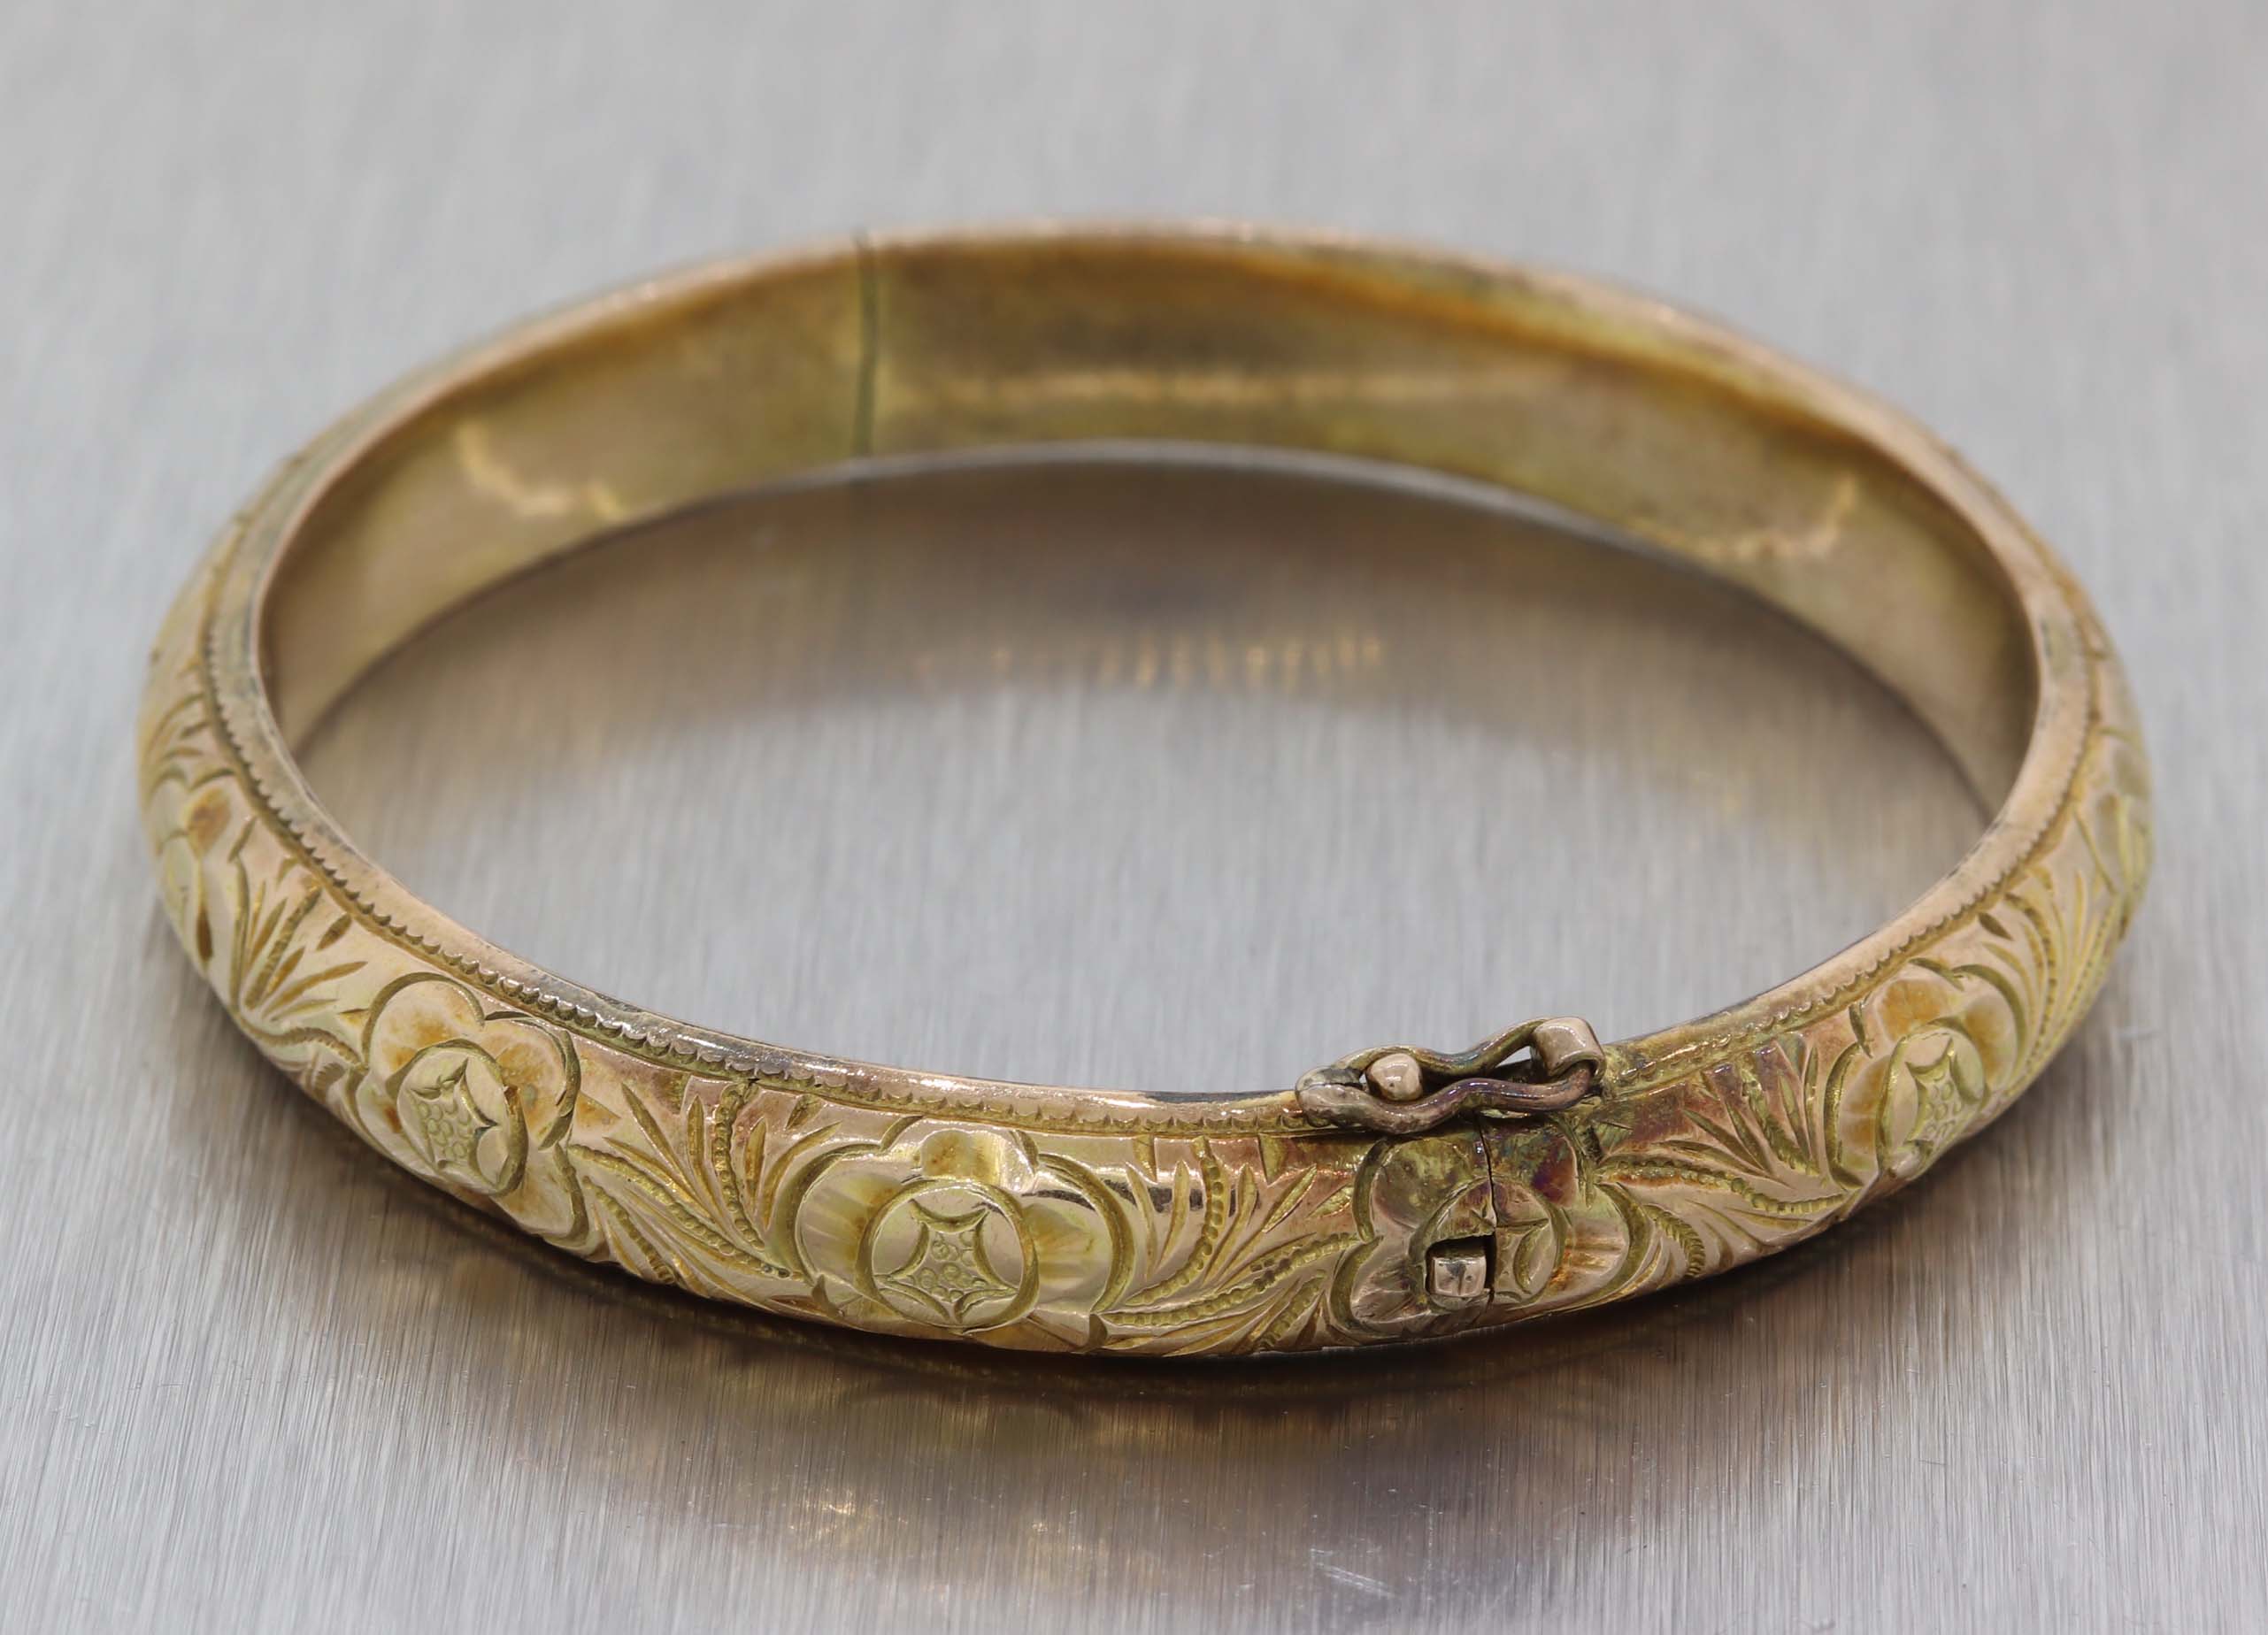 1880s Antique Victorian 14k Yellow Gold 9mm Wide Engraved Bangle Brace